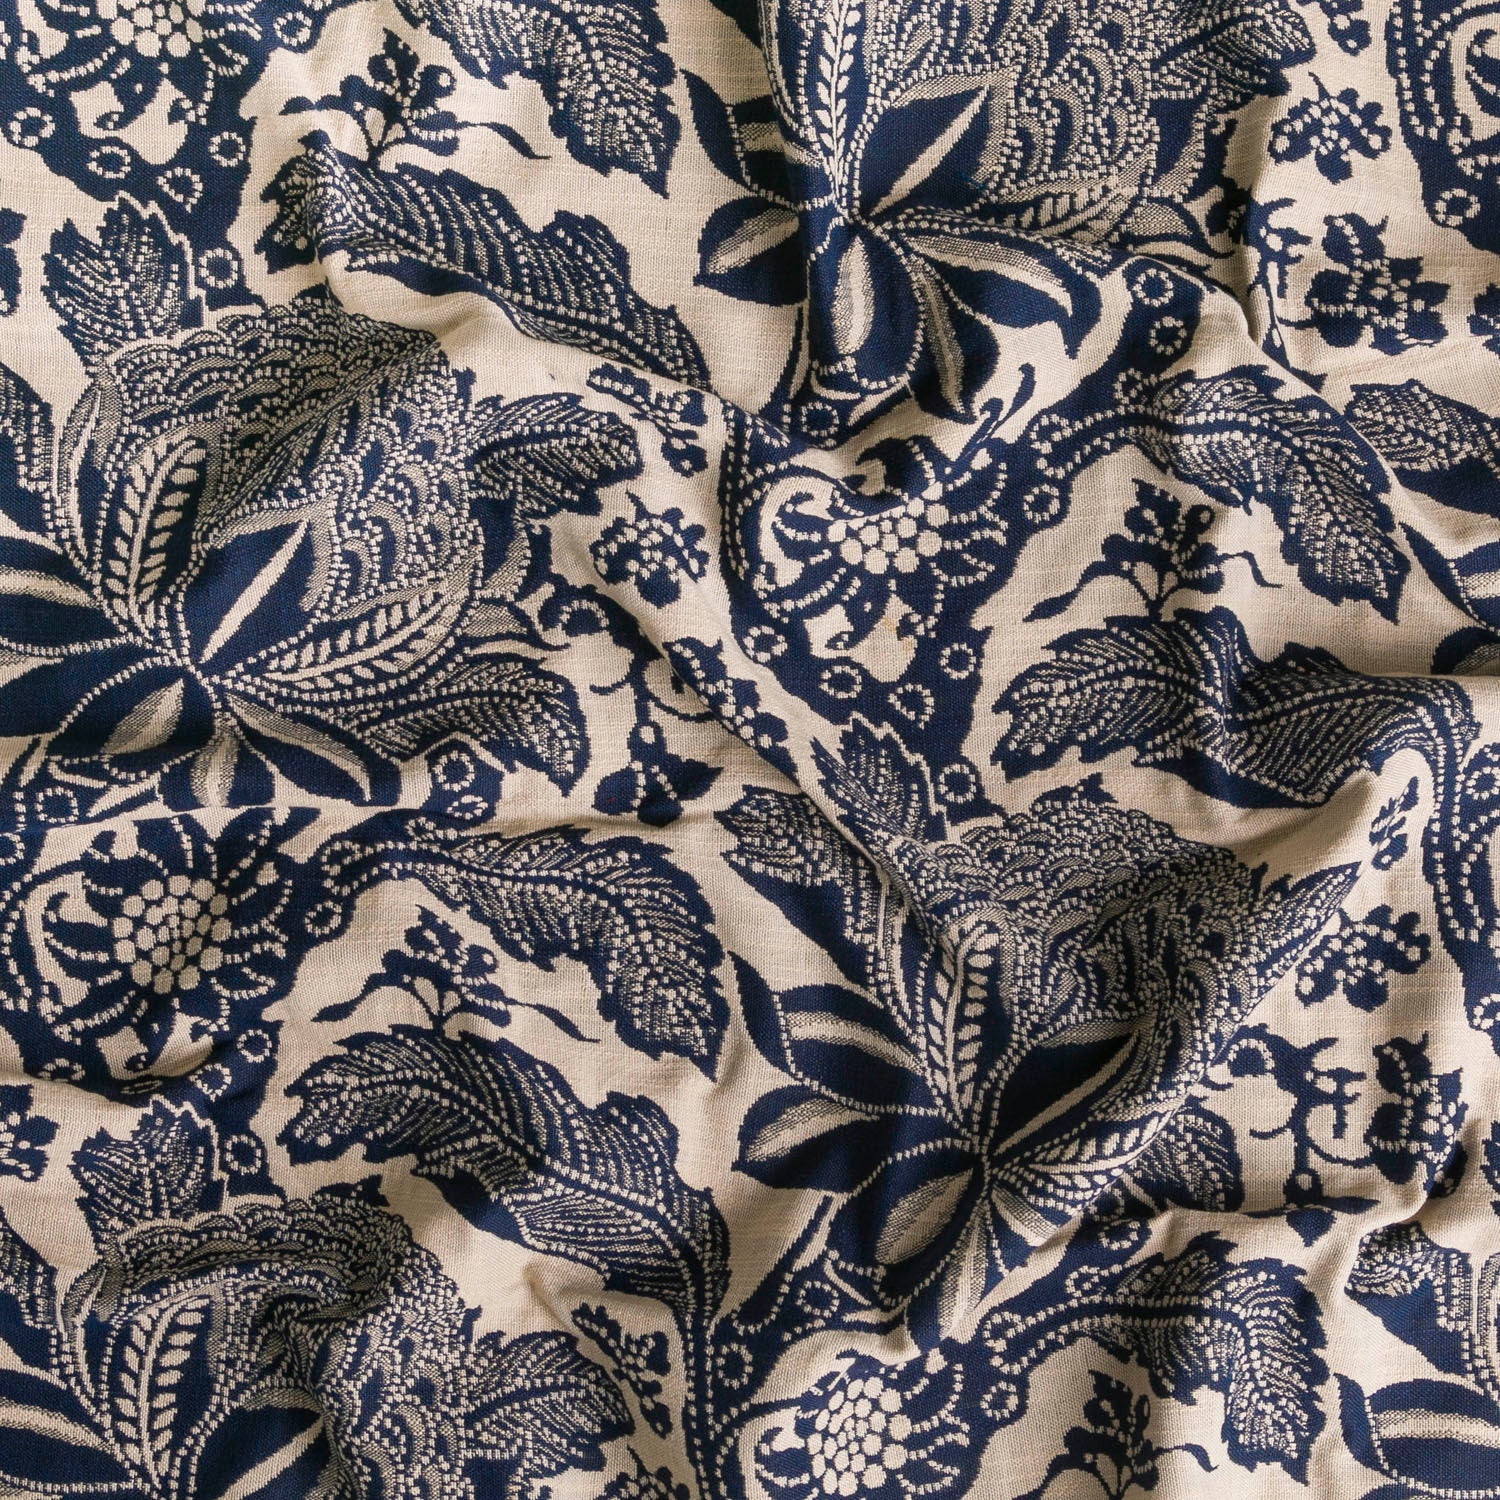 Detail of wallpaper in a repeating botanical print in navy on a cream field.